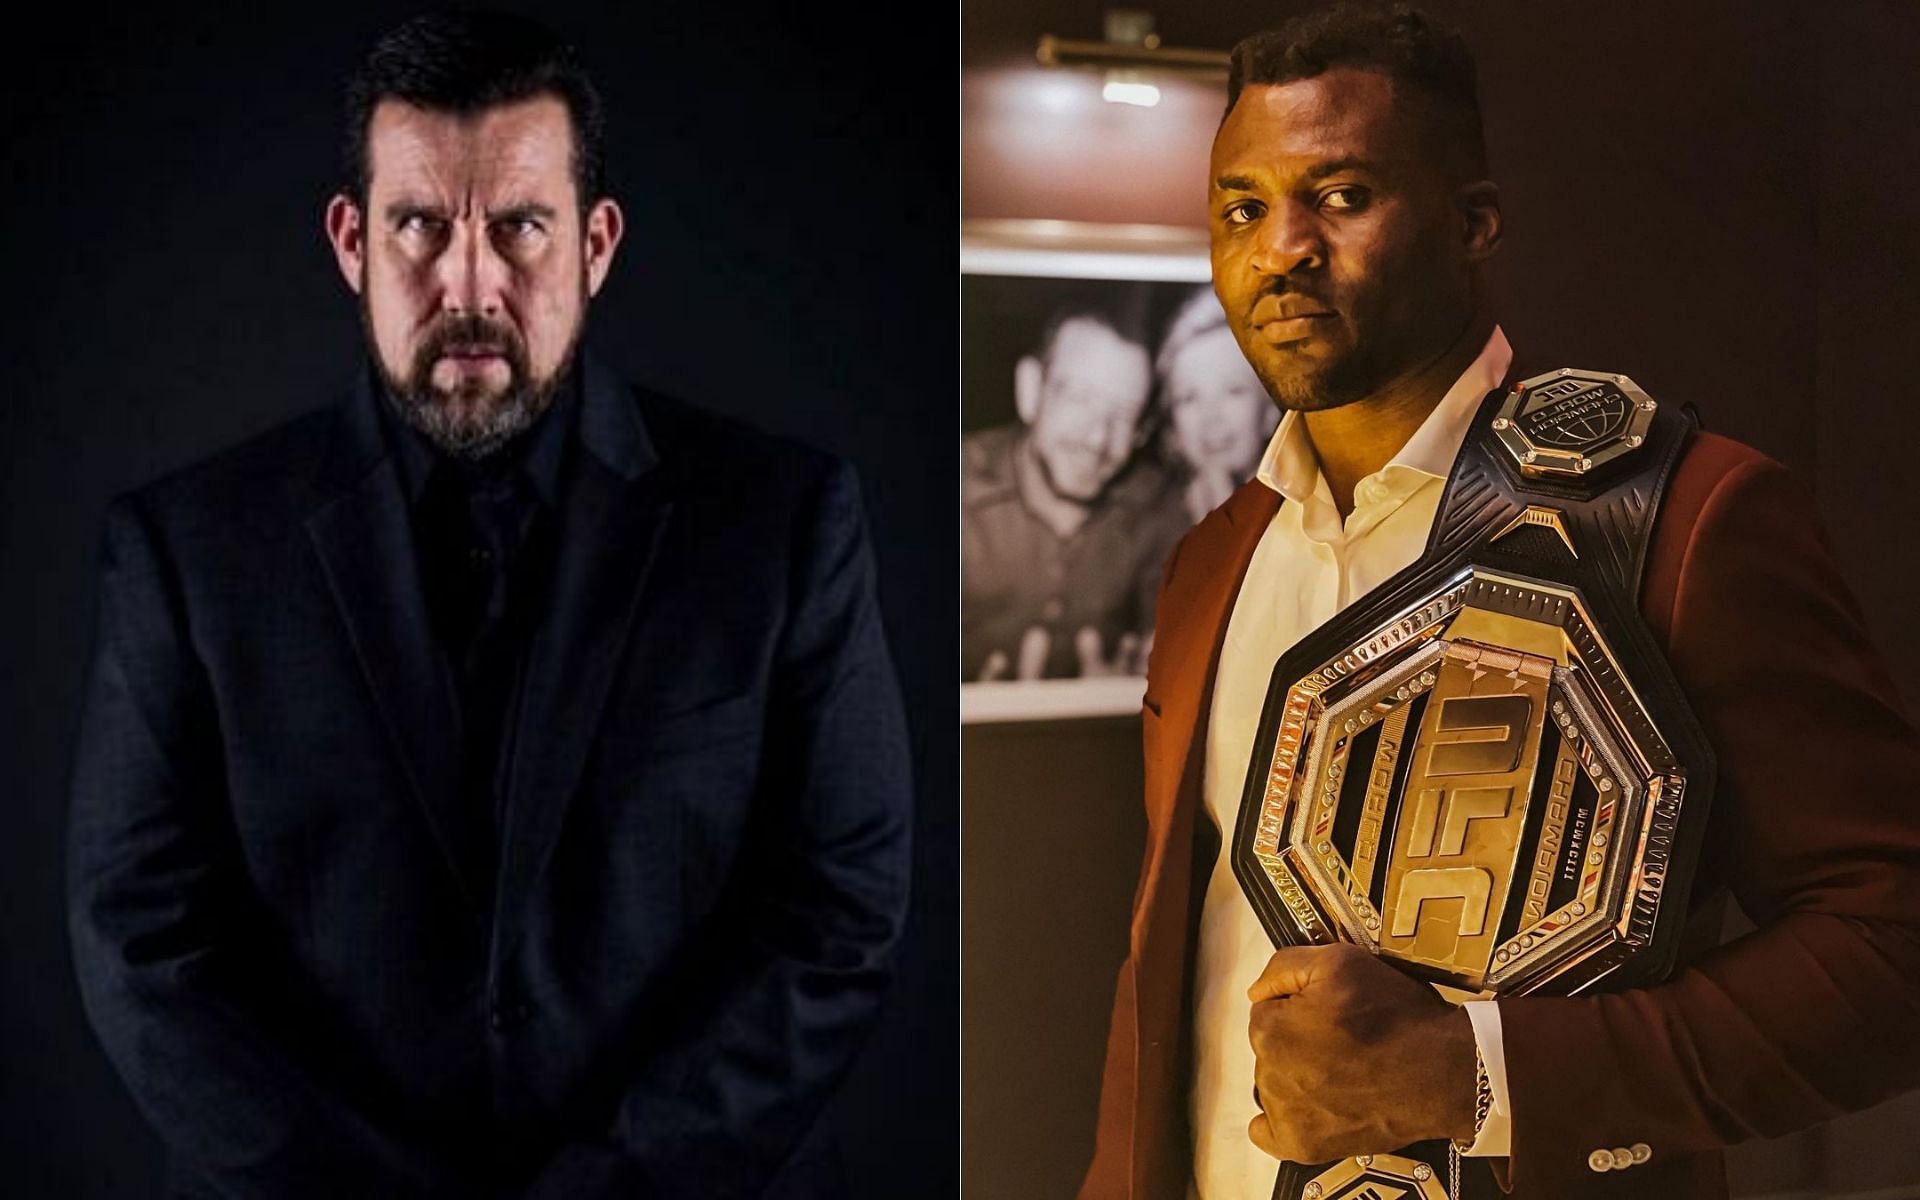 John McCarthy (left) and Francis Ngannou (right) [Image credits: @johnmccarthymma and @francisngannou on Instagram]